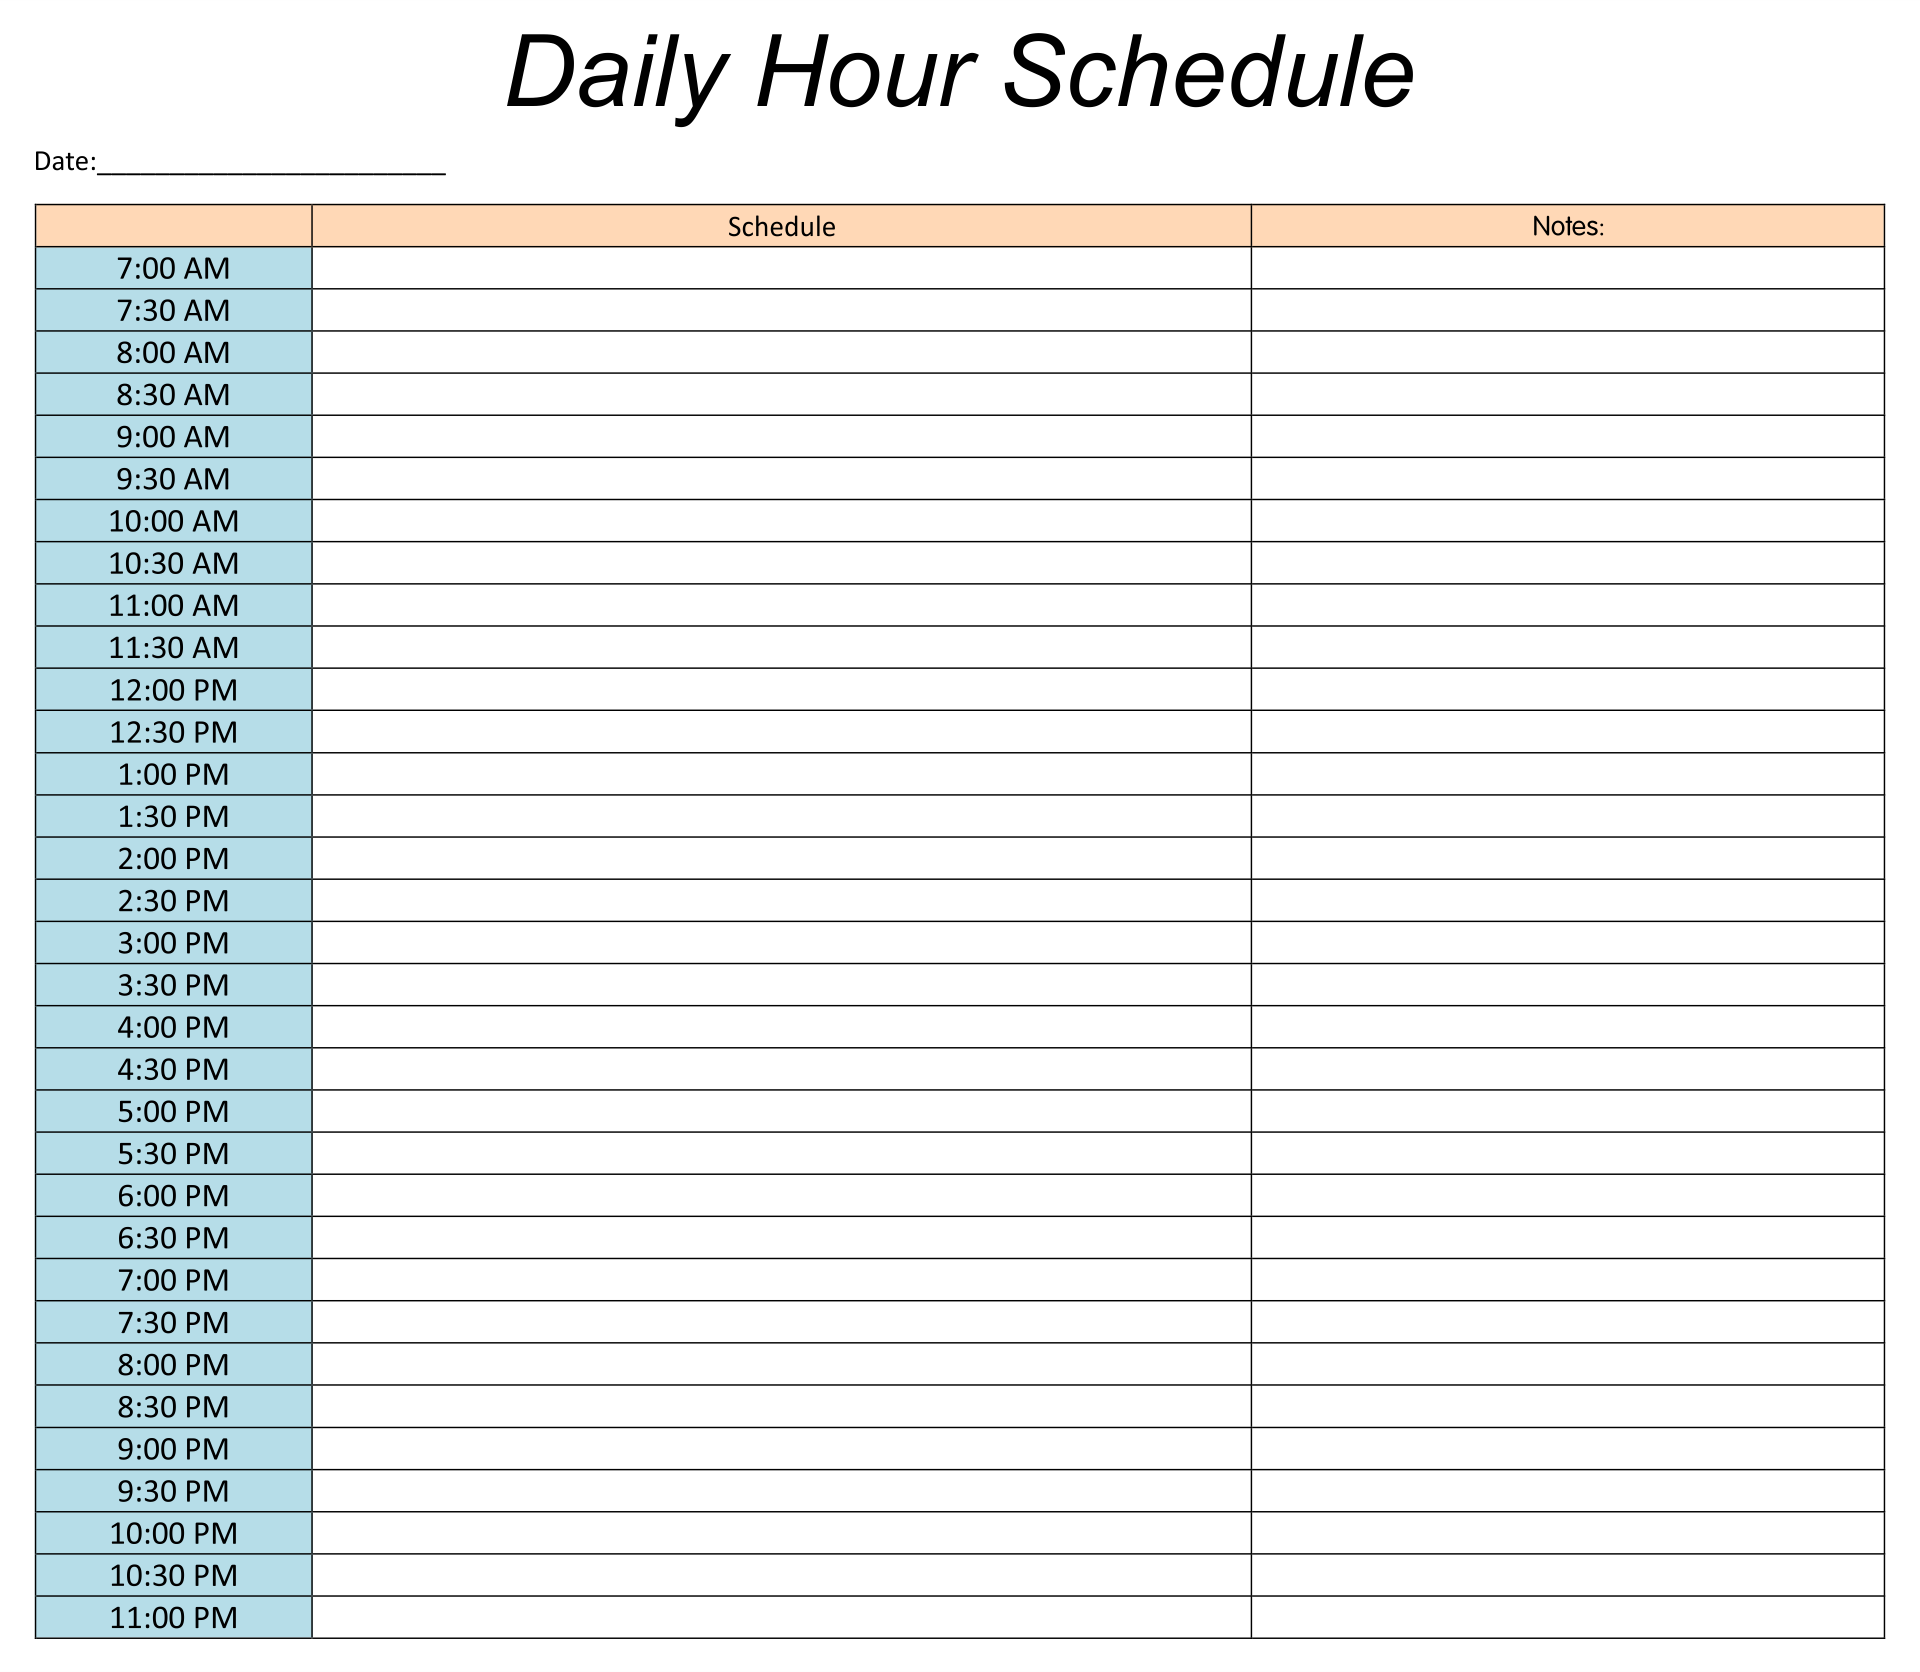 printable-daily-hourly-schedule-template-daily-schedule-printable-images